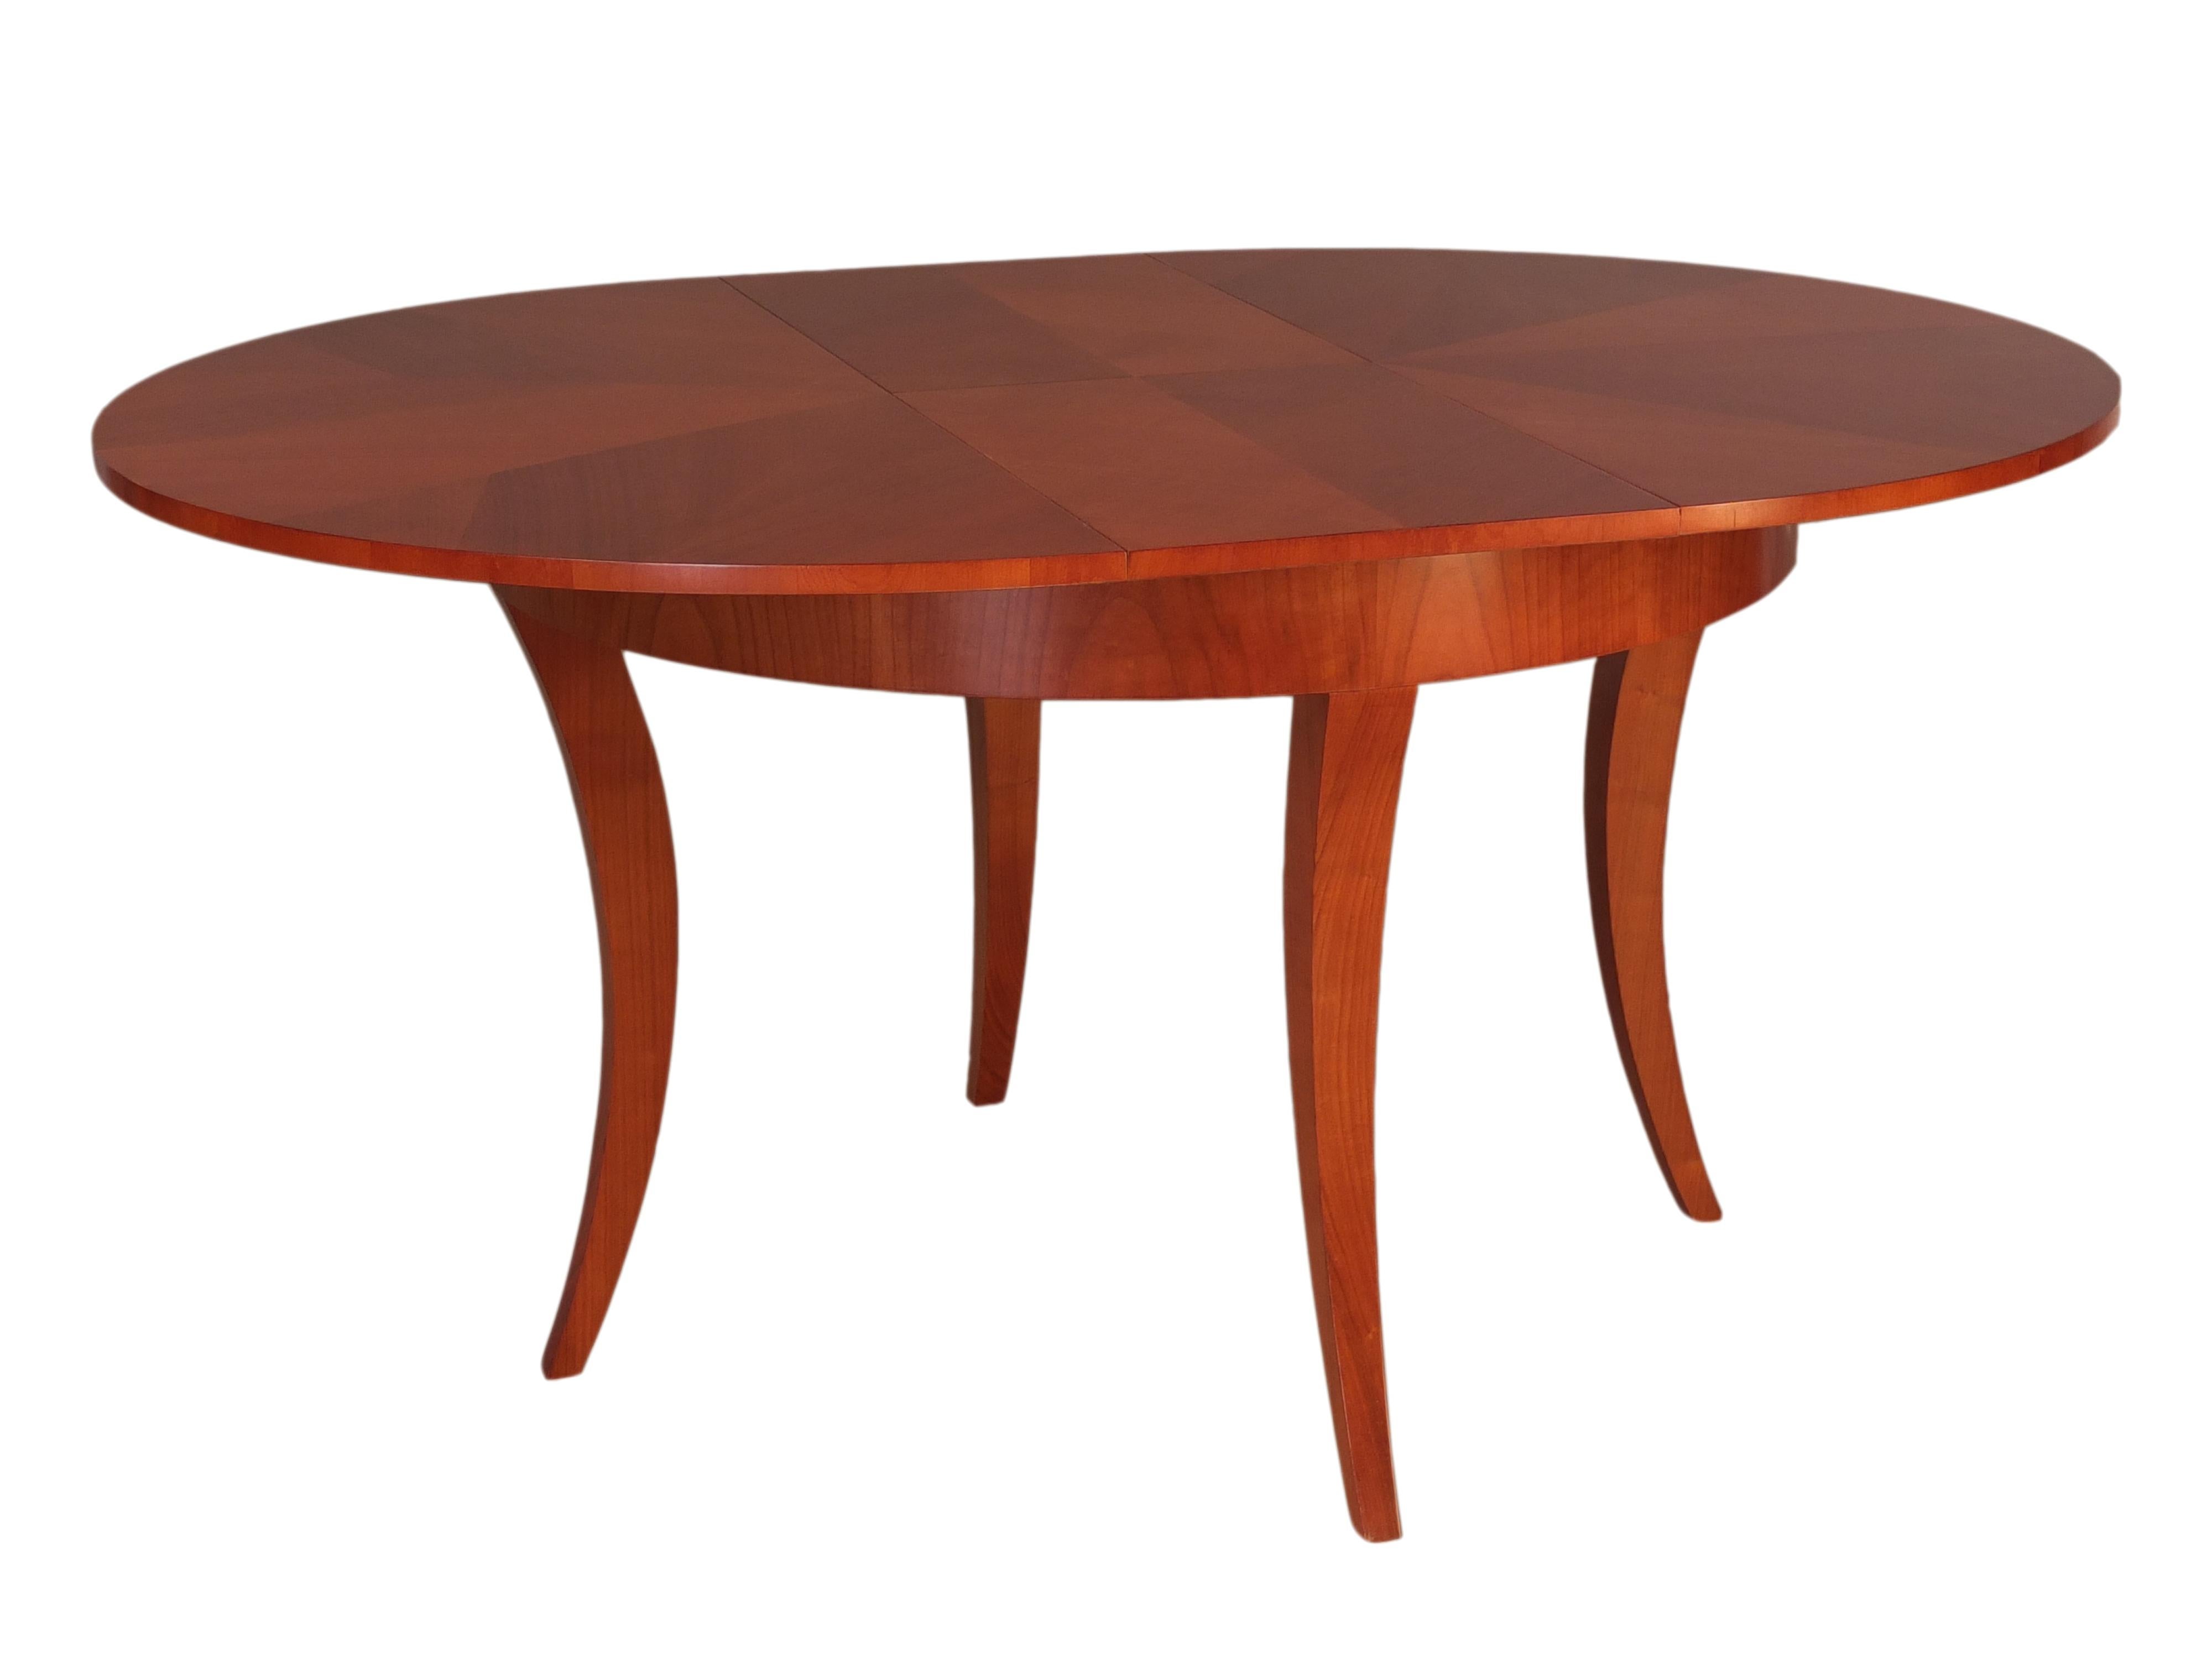 Italian Contemporary Extendable Table in Biedermeier Style Made of Cherrywood